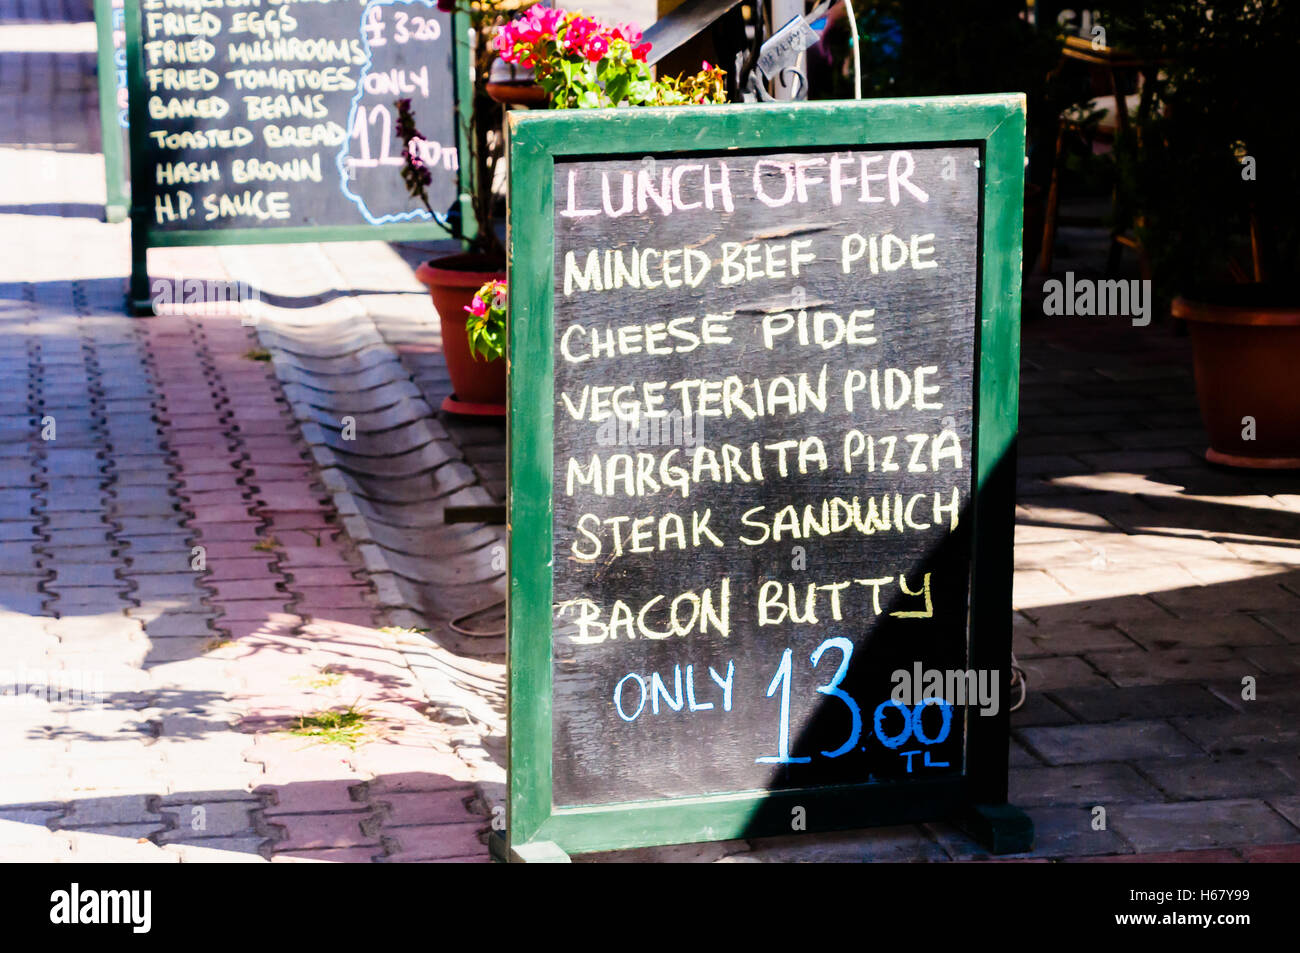 Blackboard at a restaurant with the lunch menu offers including minced beef, cheese, vegetarian, margarita pide (Turkish pizza) Stock Photo